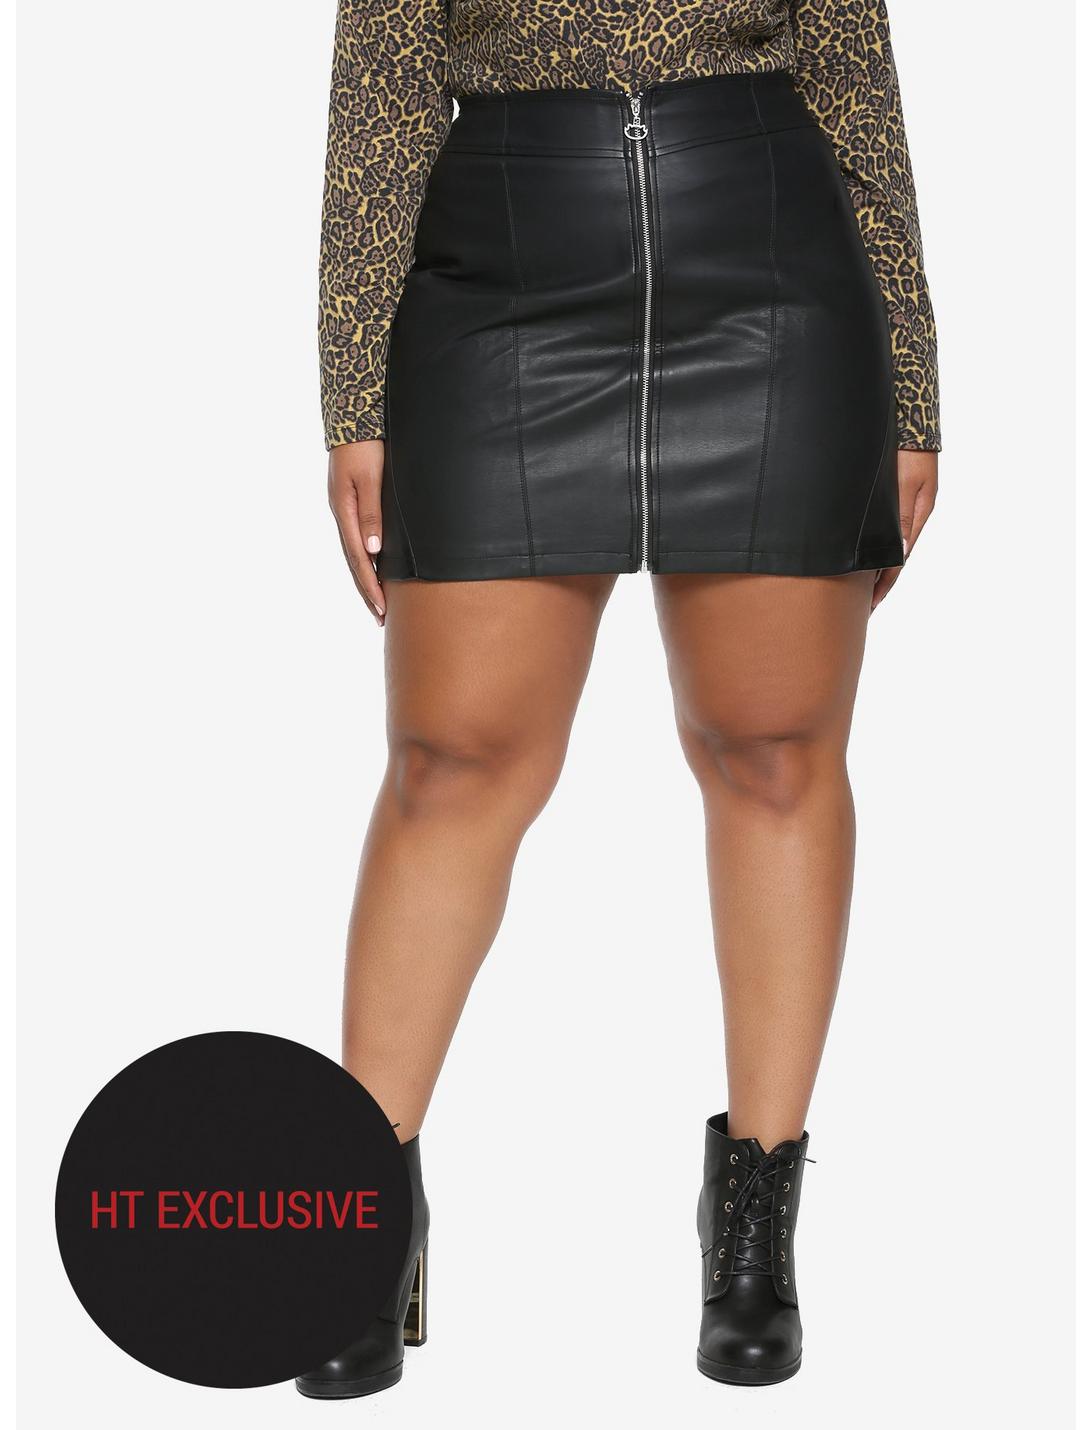 Riverdale Josie And The Pussycats Black Faux Leather Skirt Plus Size Hot Topic Exclusive, BLACK, hi-res